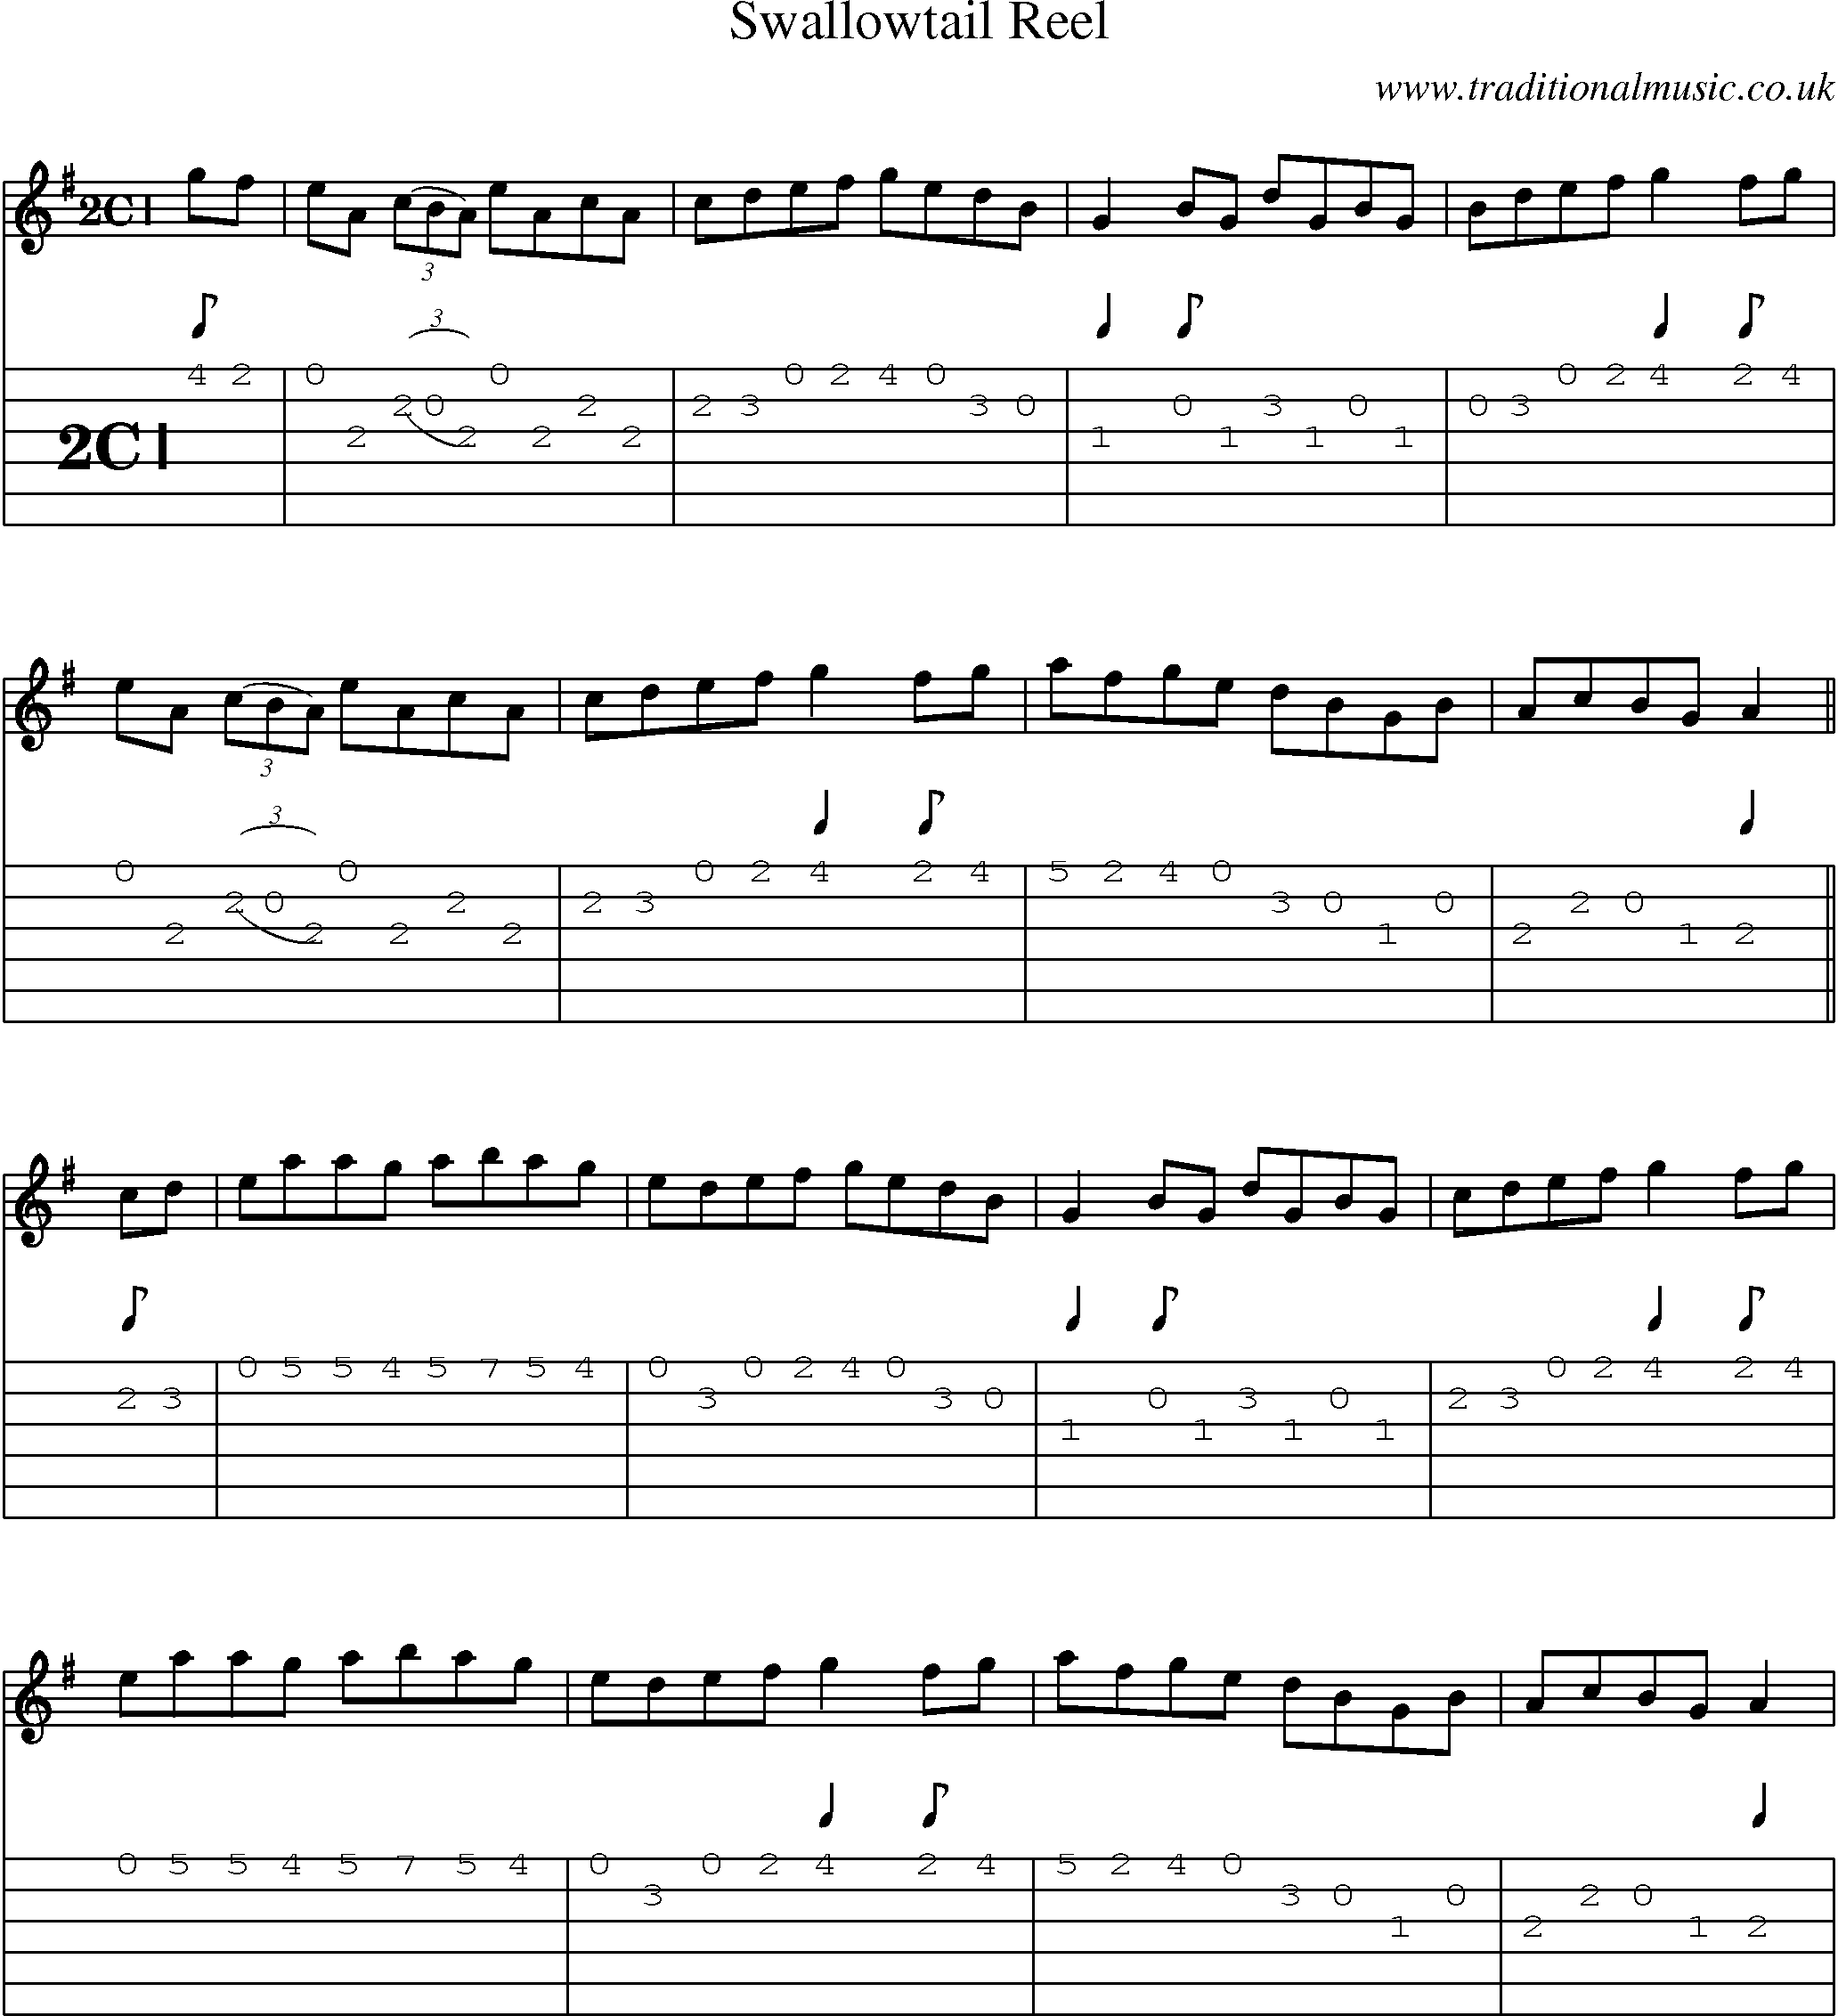 Music Score and Guitar Tabs for Swallowtail Reel